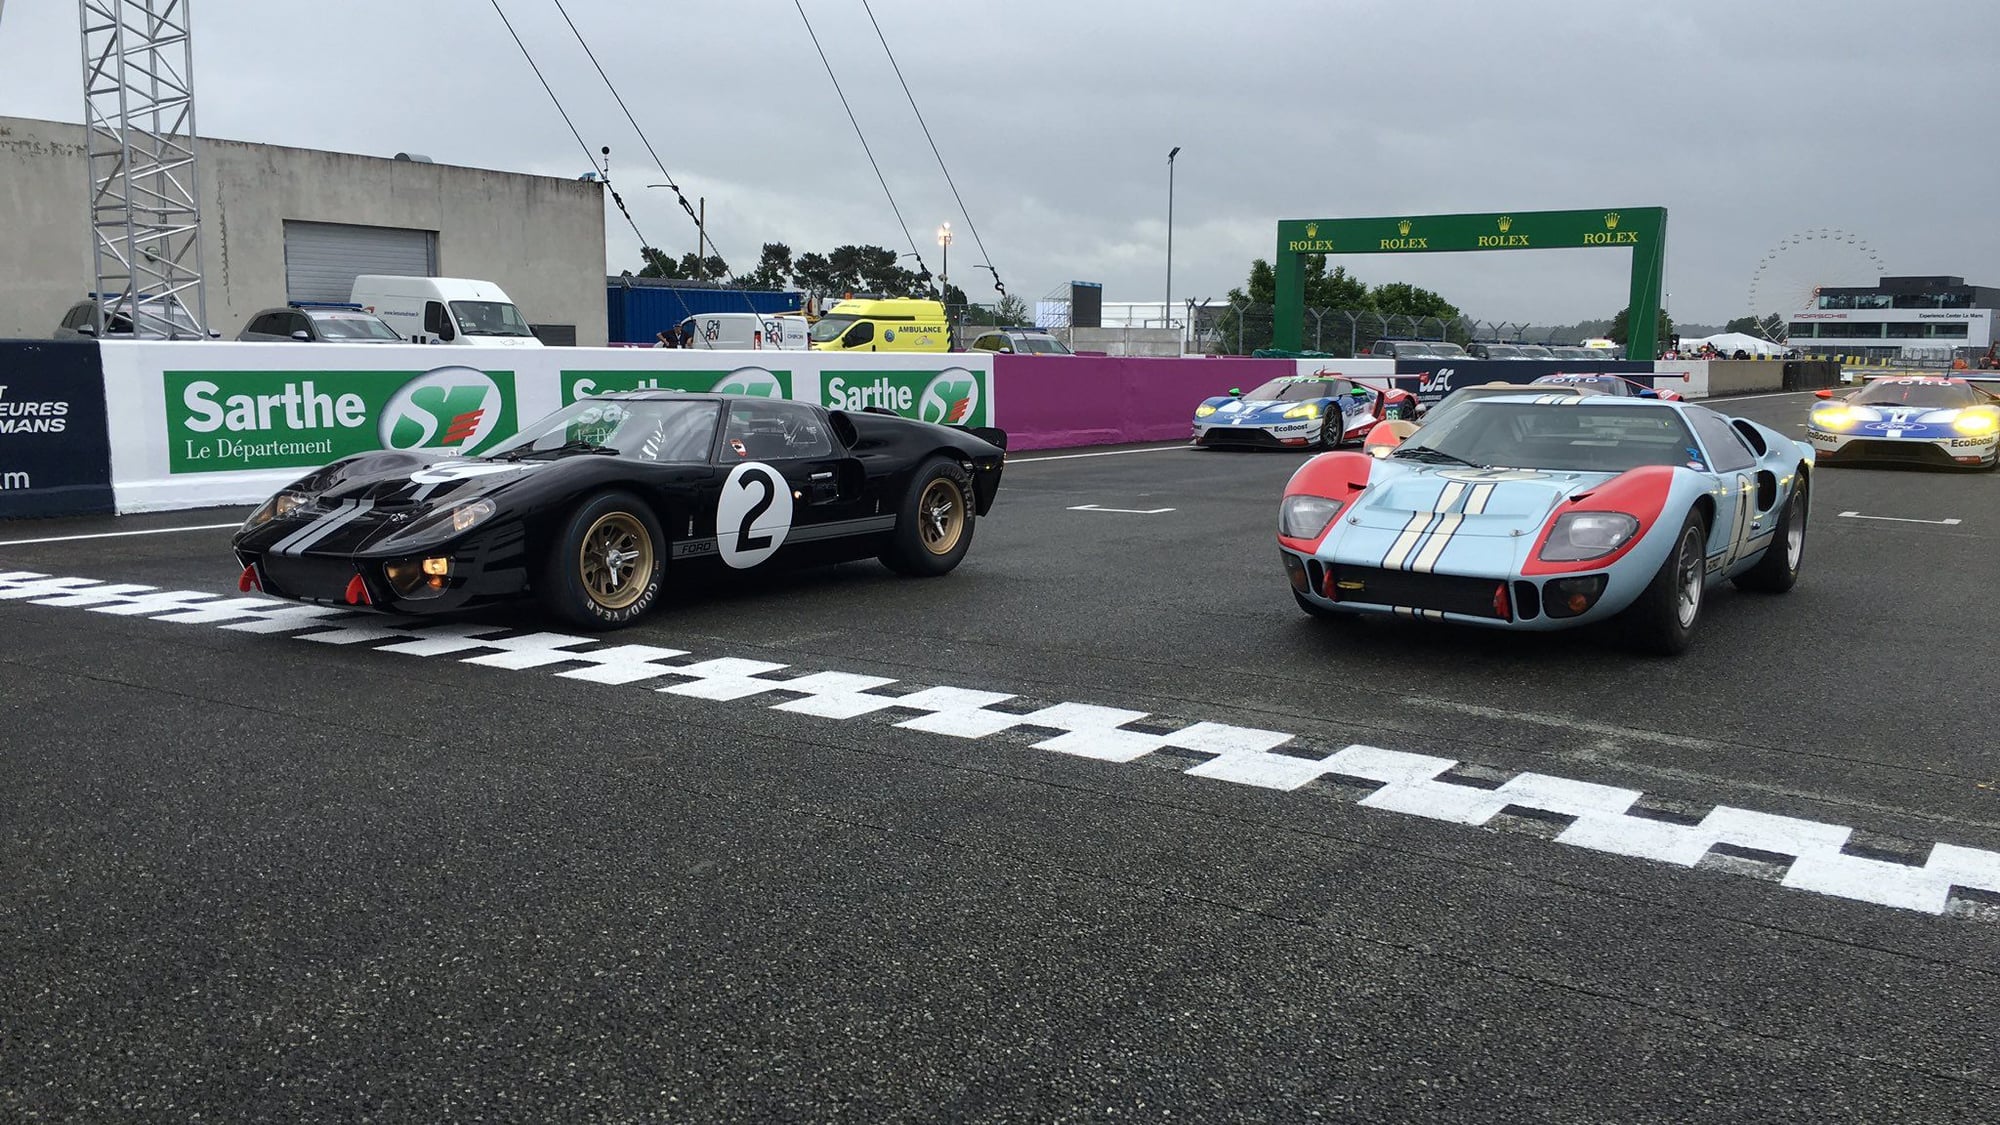 1966 Ford GT40 P1046 at Le Mans, re-creation of 1-2-3 finish, June 2016